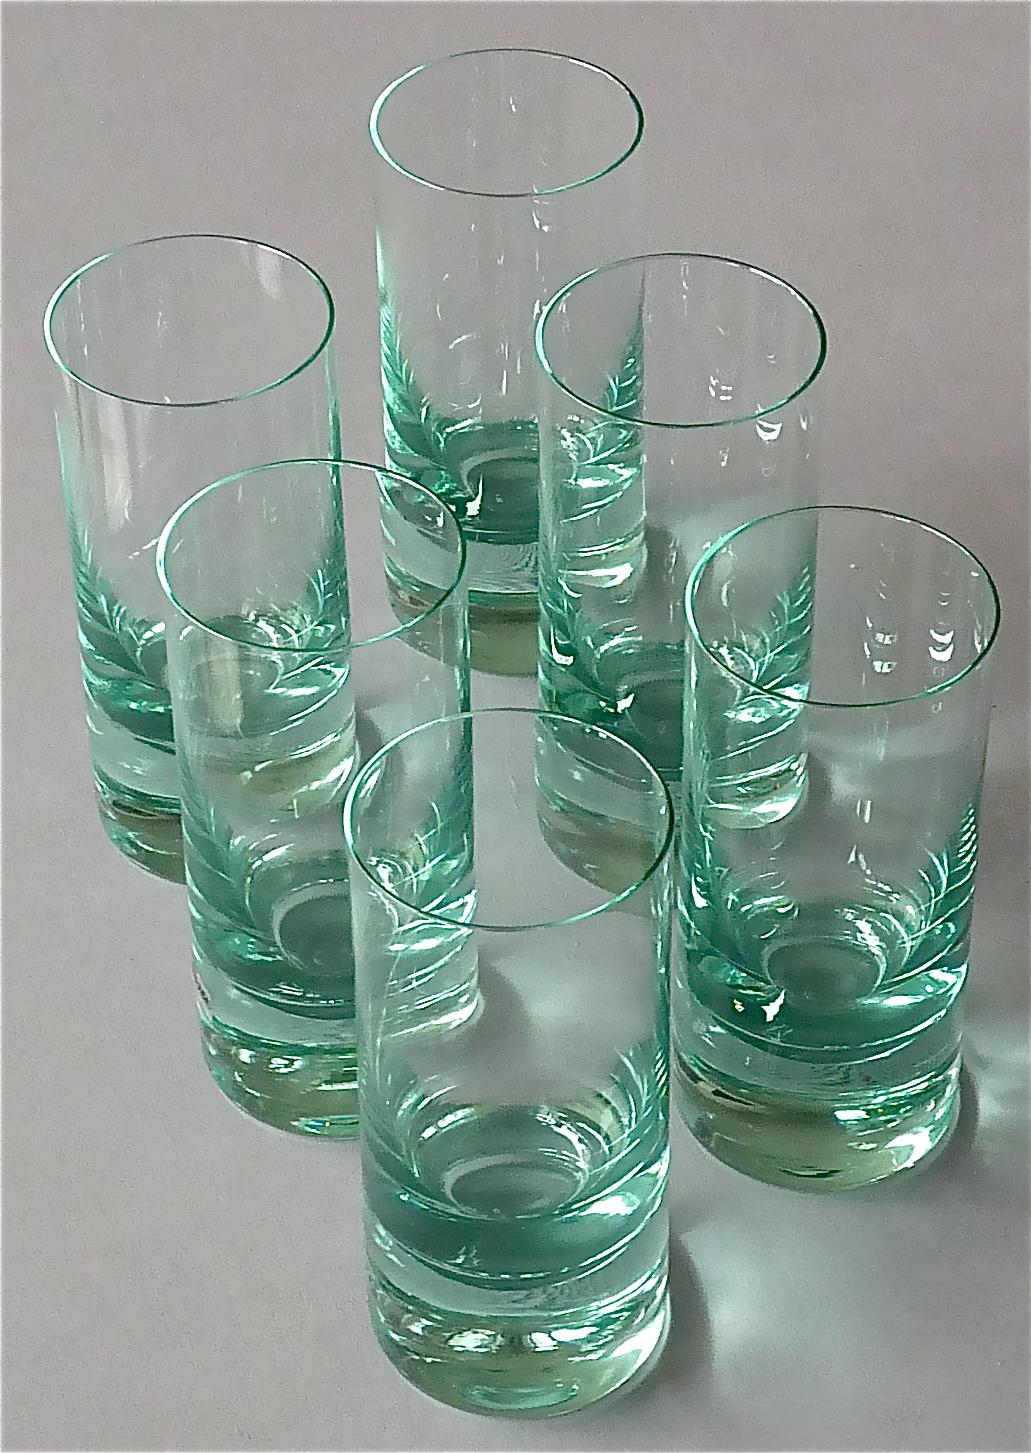 Chic set of six water / long drink / cocktail crystal glasses designed and executed in the 1960s by Moser Czechoslovakia. The high end quality of the glass is famous and can easily compare to Saint Louis and Baccarat in France. The used color of the